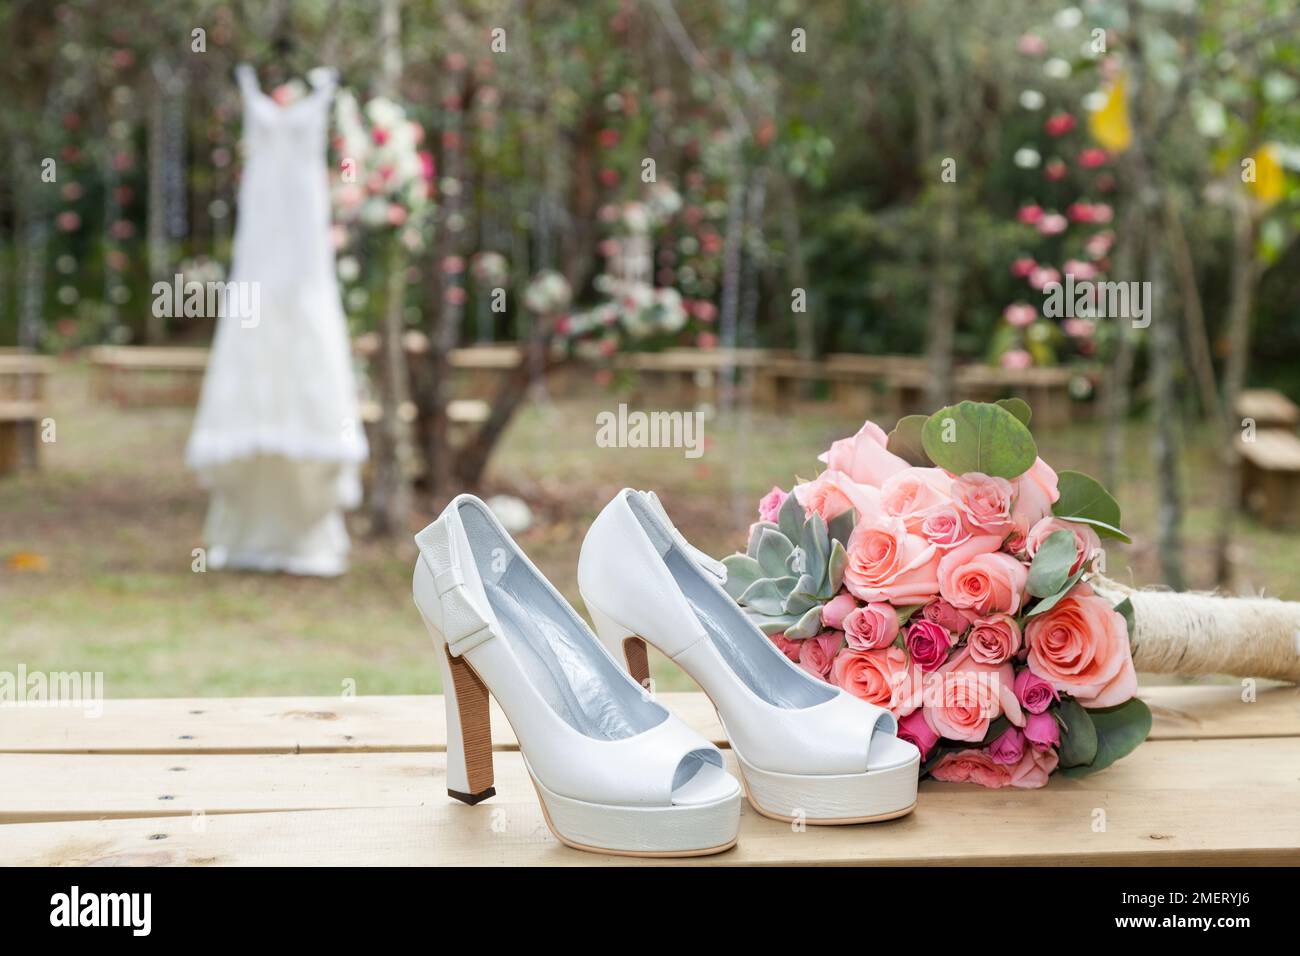 Shoes And Bouquet For The Bride On Wedding Day. Stock Photo